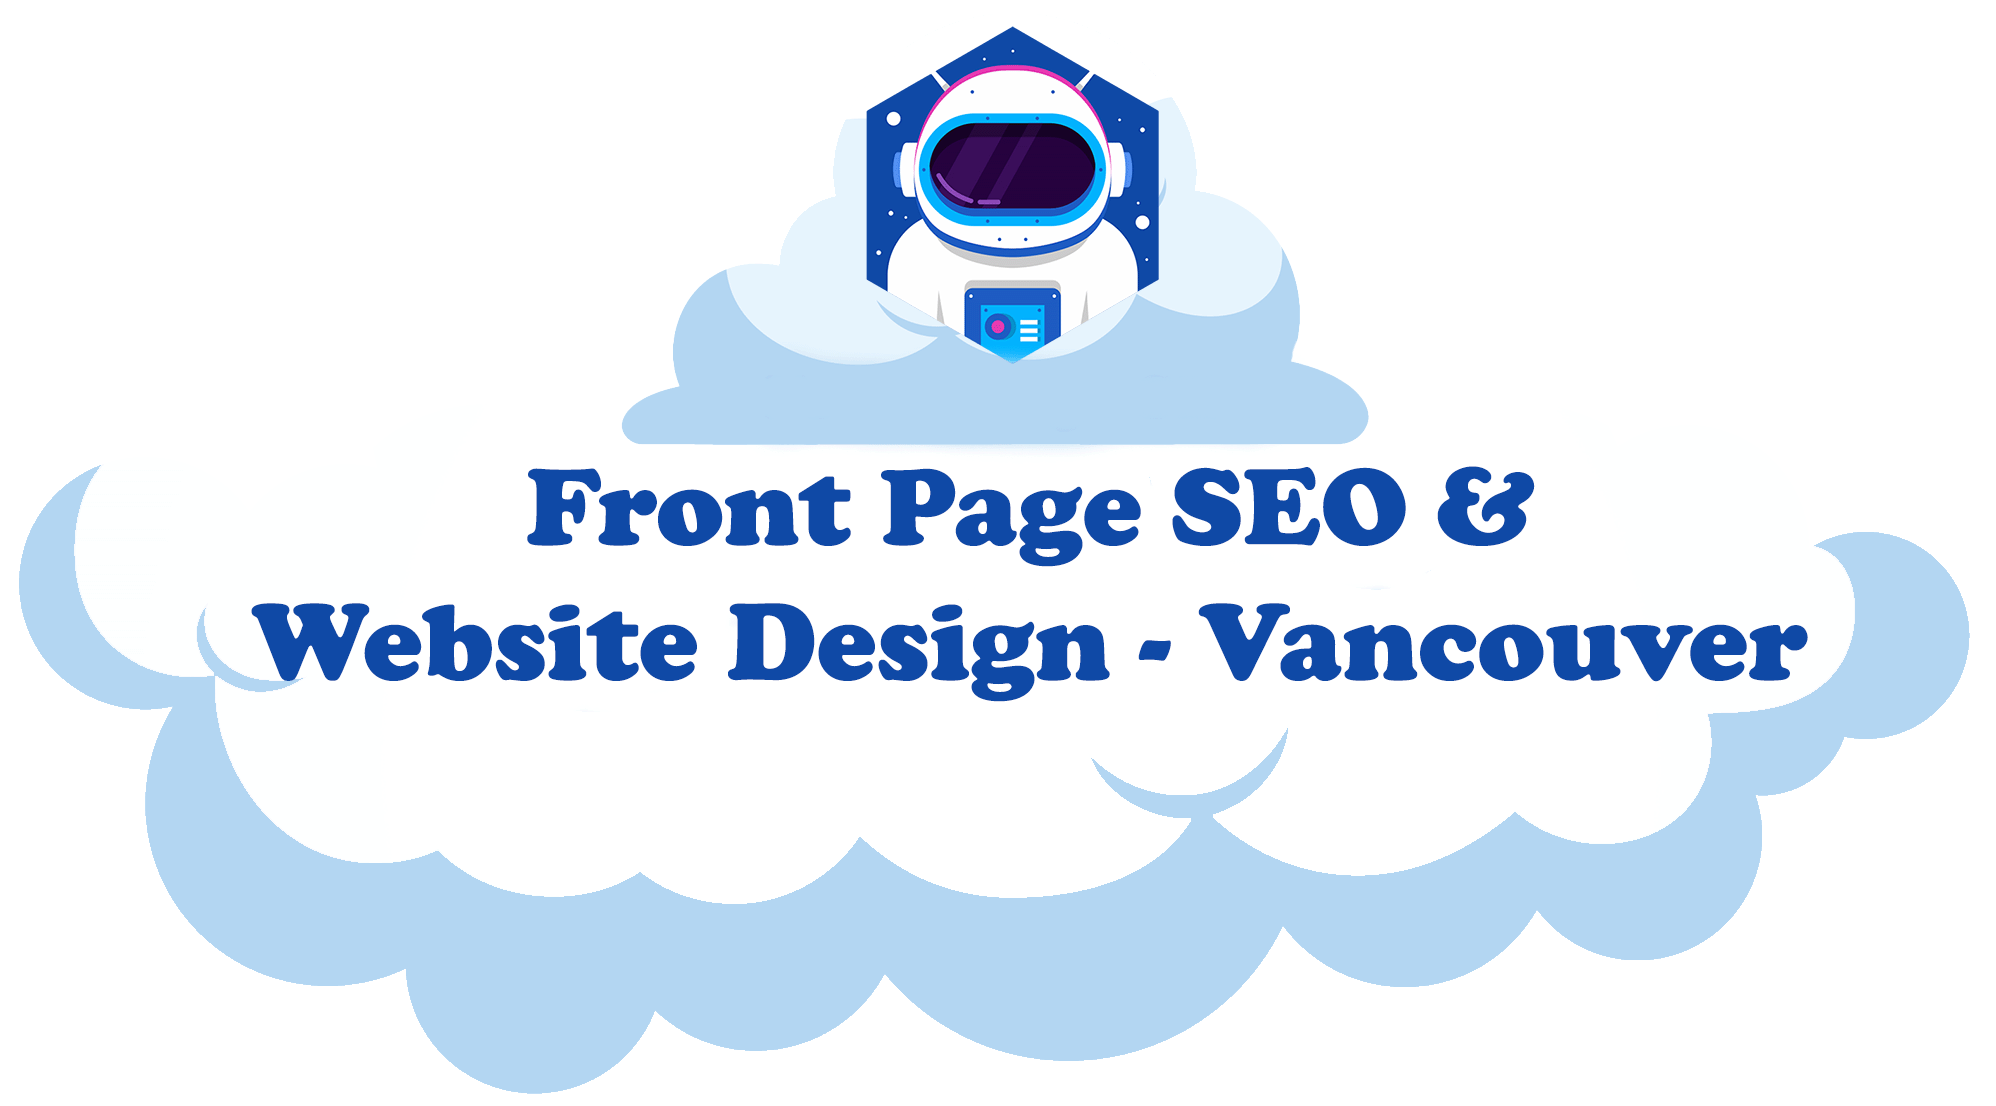 Front Page SEO & Website Design - Vancouver, Is Now Open For Business Providing Premium Website Design & SEO Services